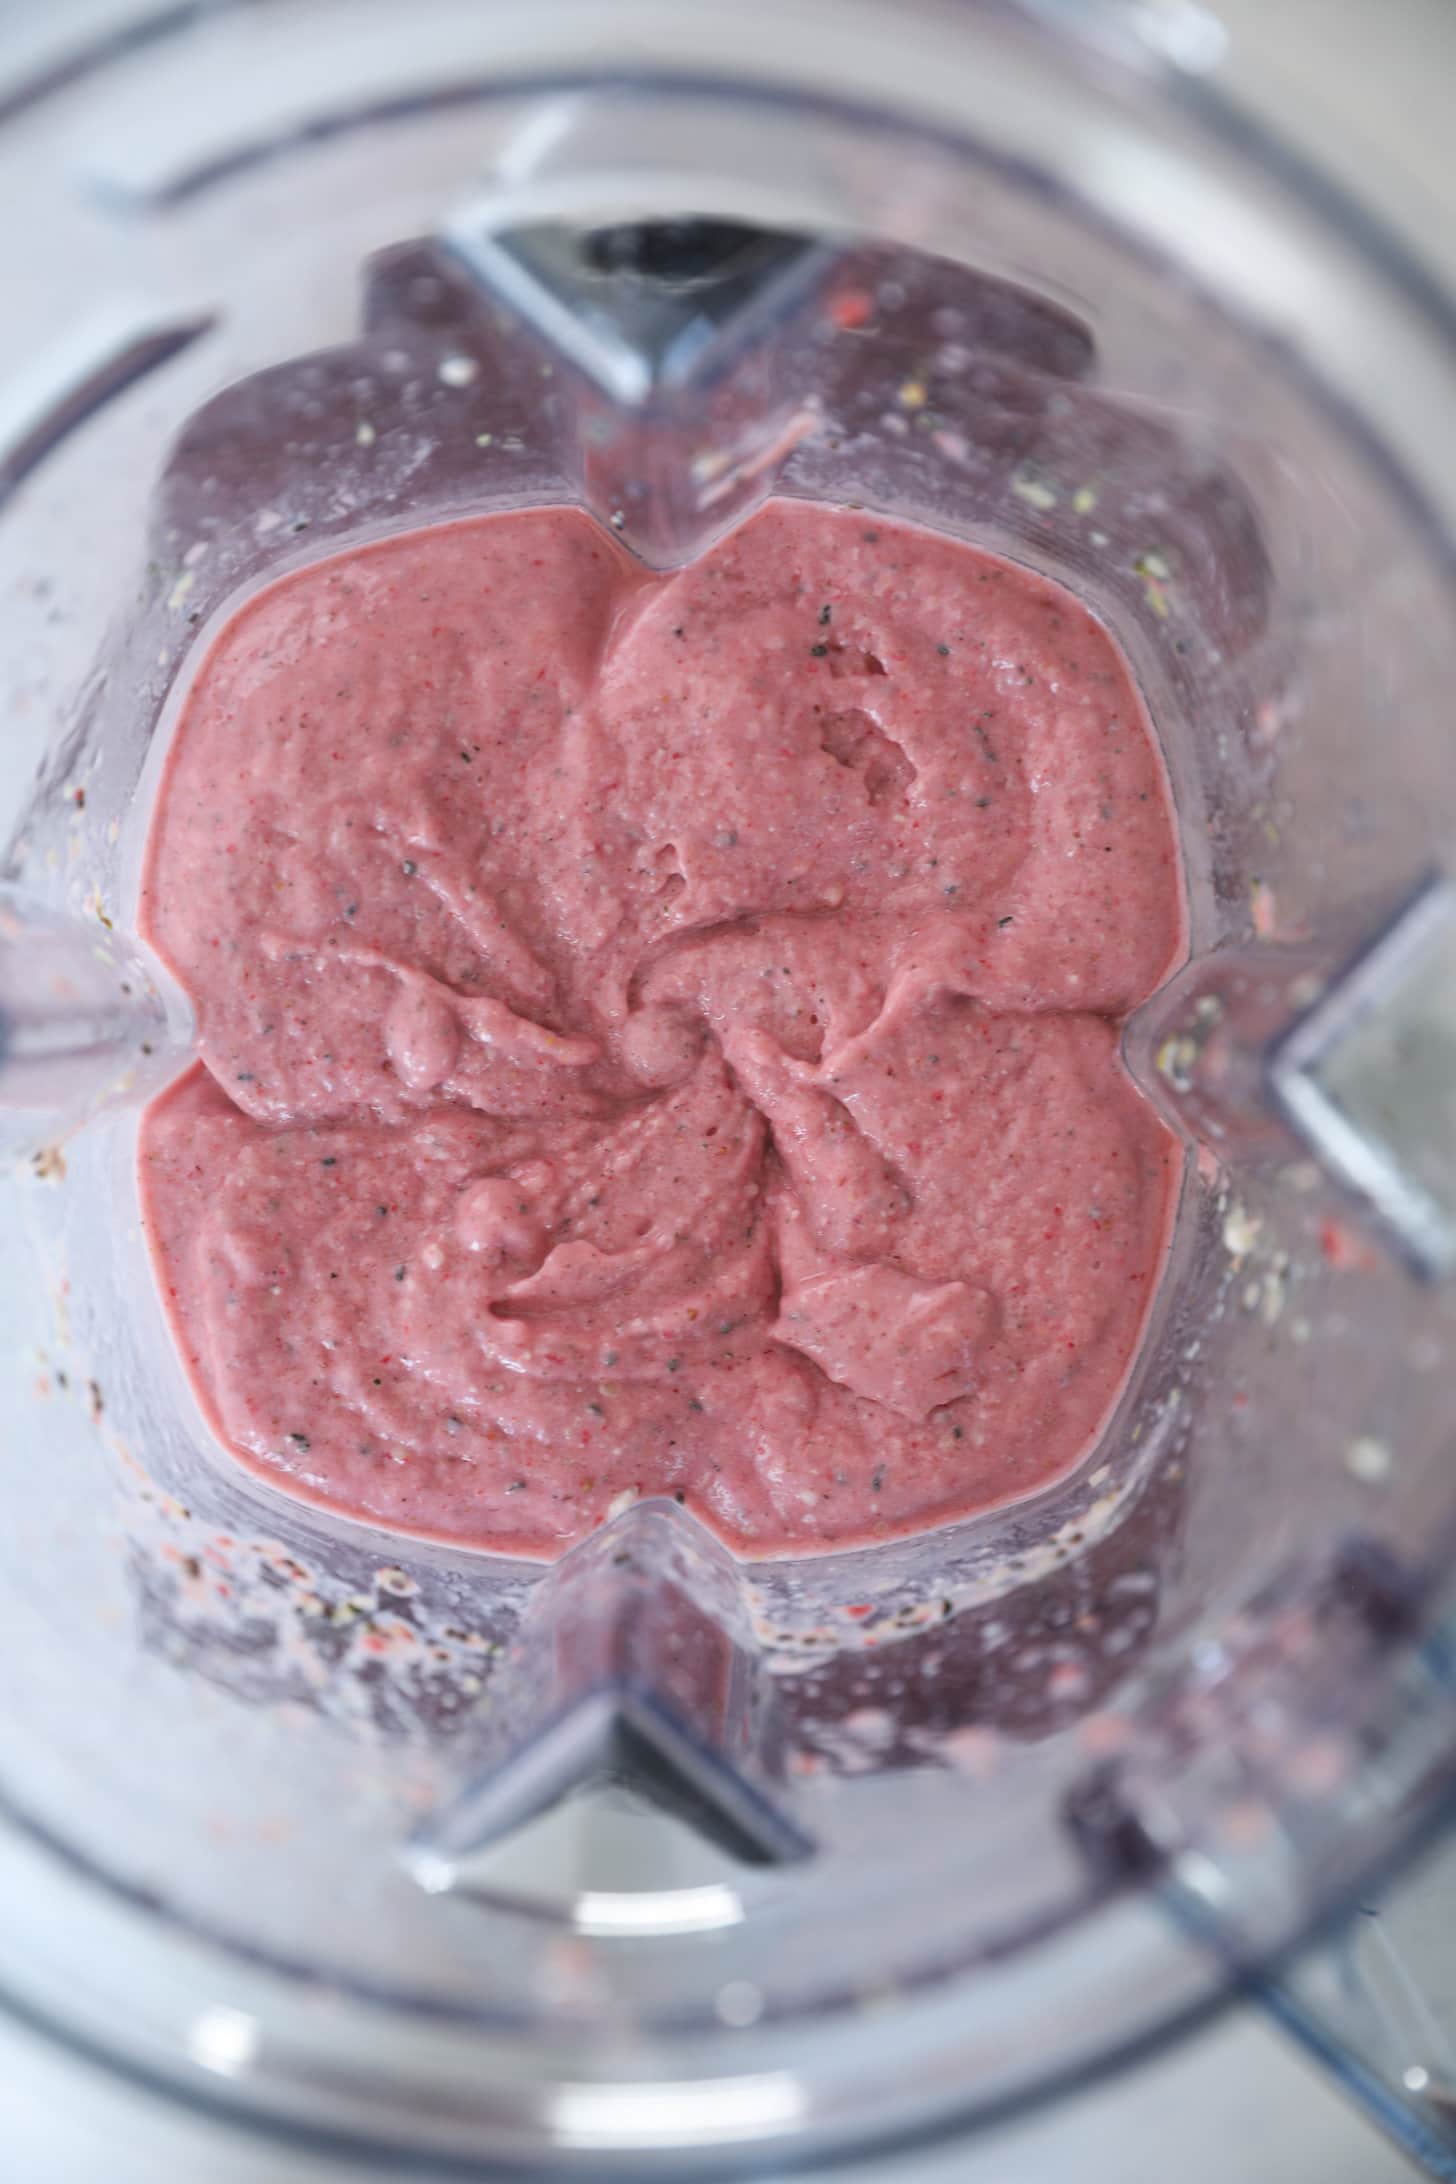 Overhead image of a pink smoothie in a blender.